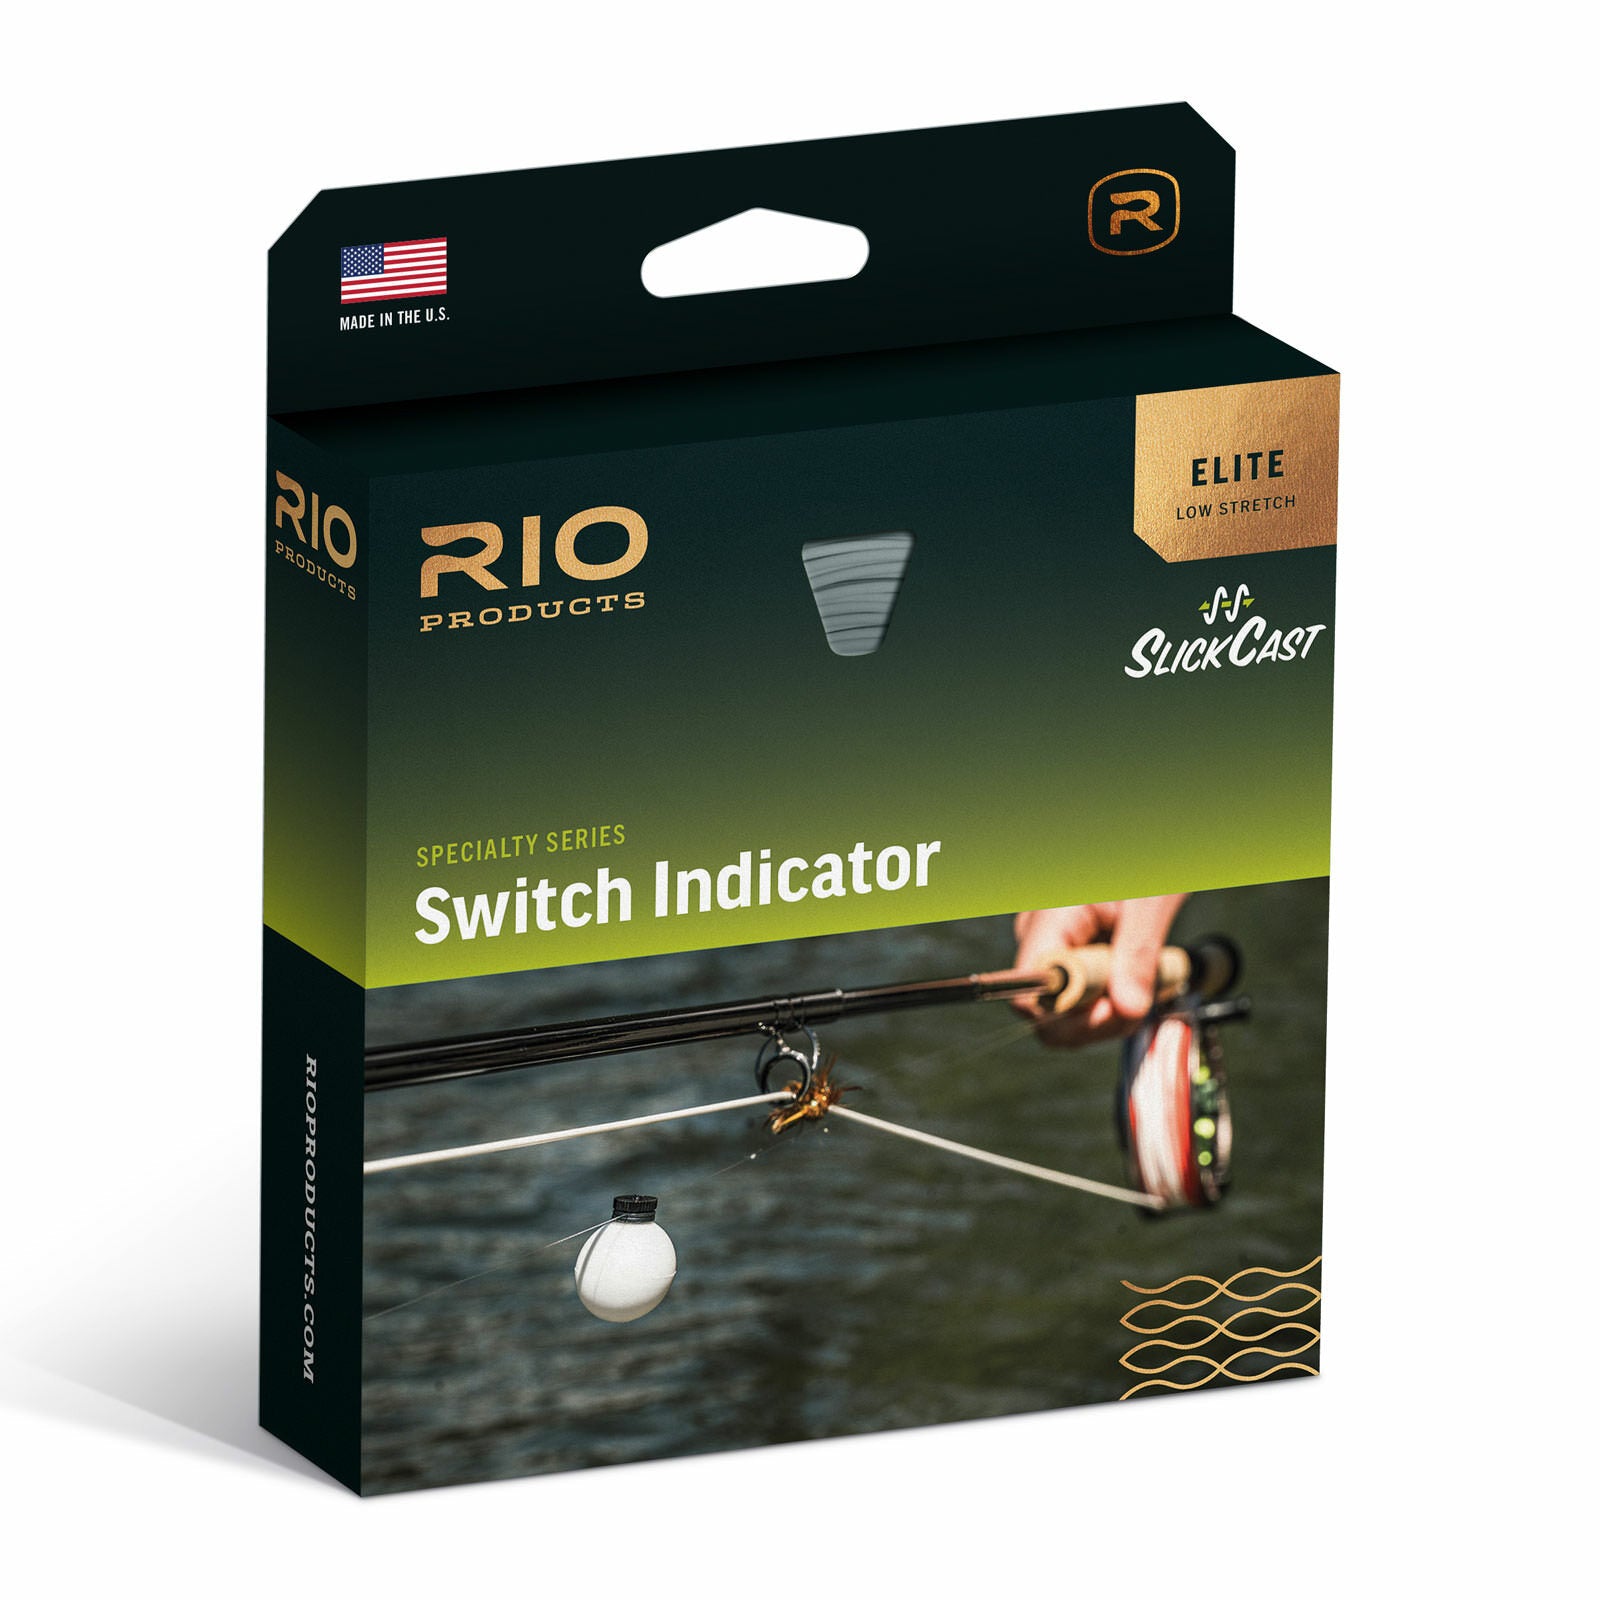 Rio Products Fly Fishing Line average savings of 50% at Sierra